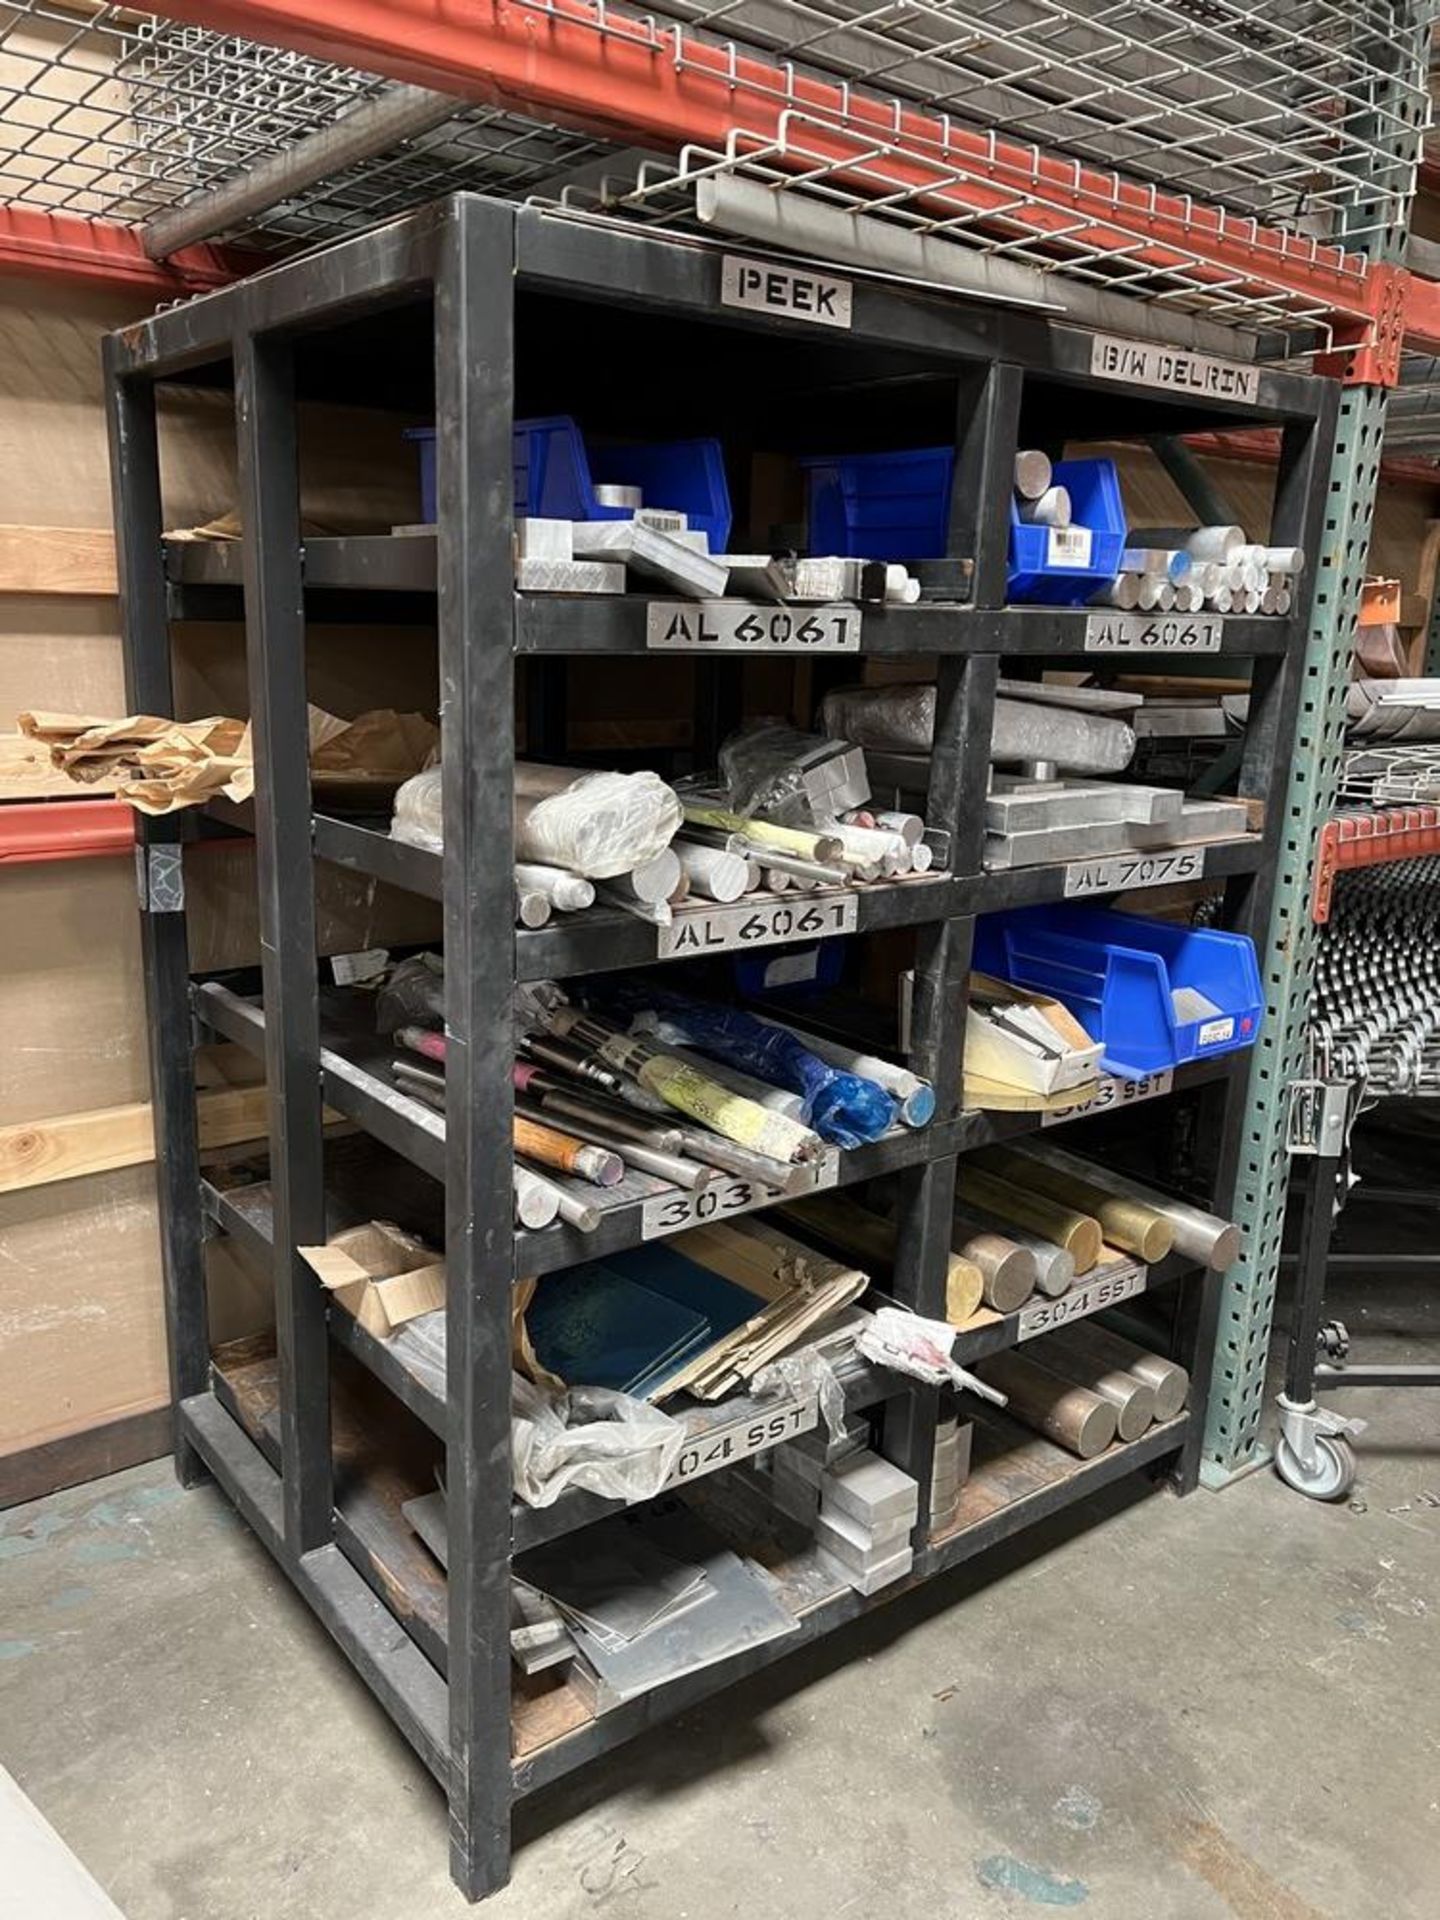 5 Tier Heavy Duty Material Rack With A27075, Aluminum 6061, 303SST, Brass, 304SST, Rounds and - Image 2 of 8